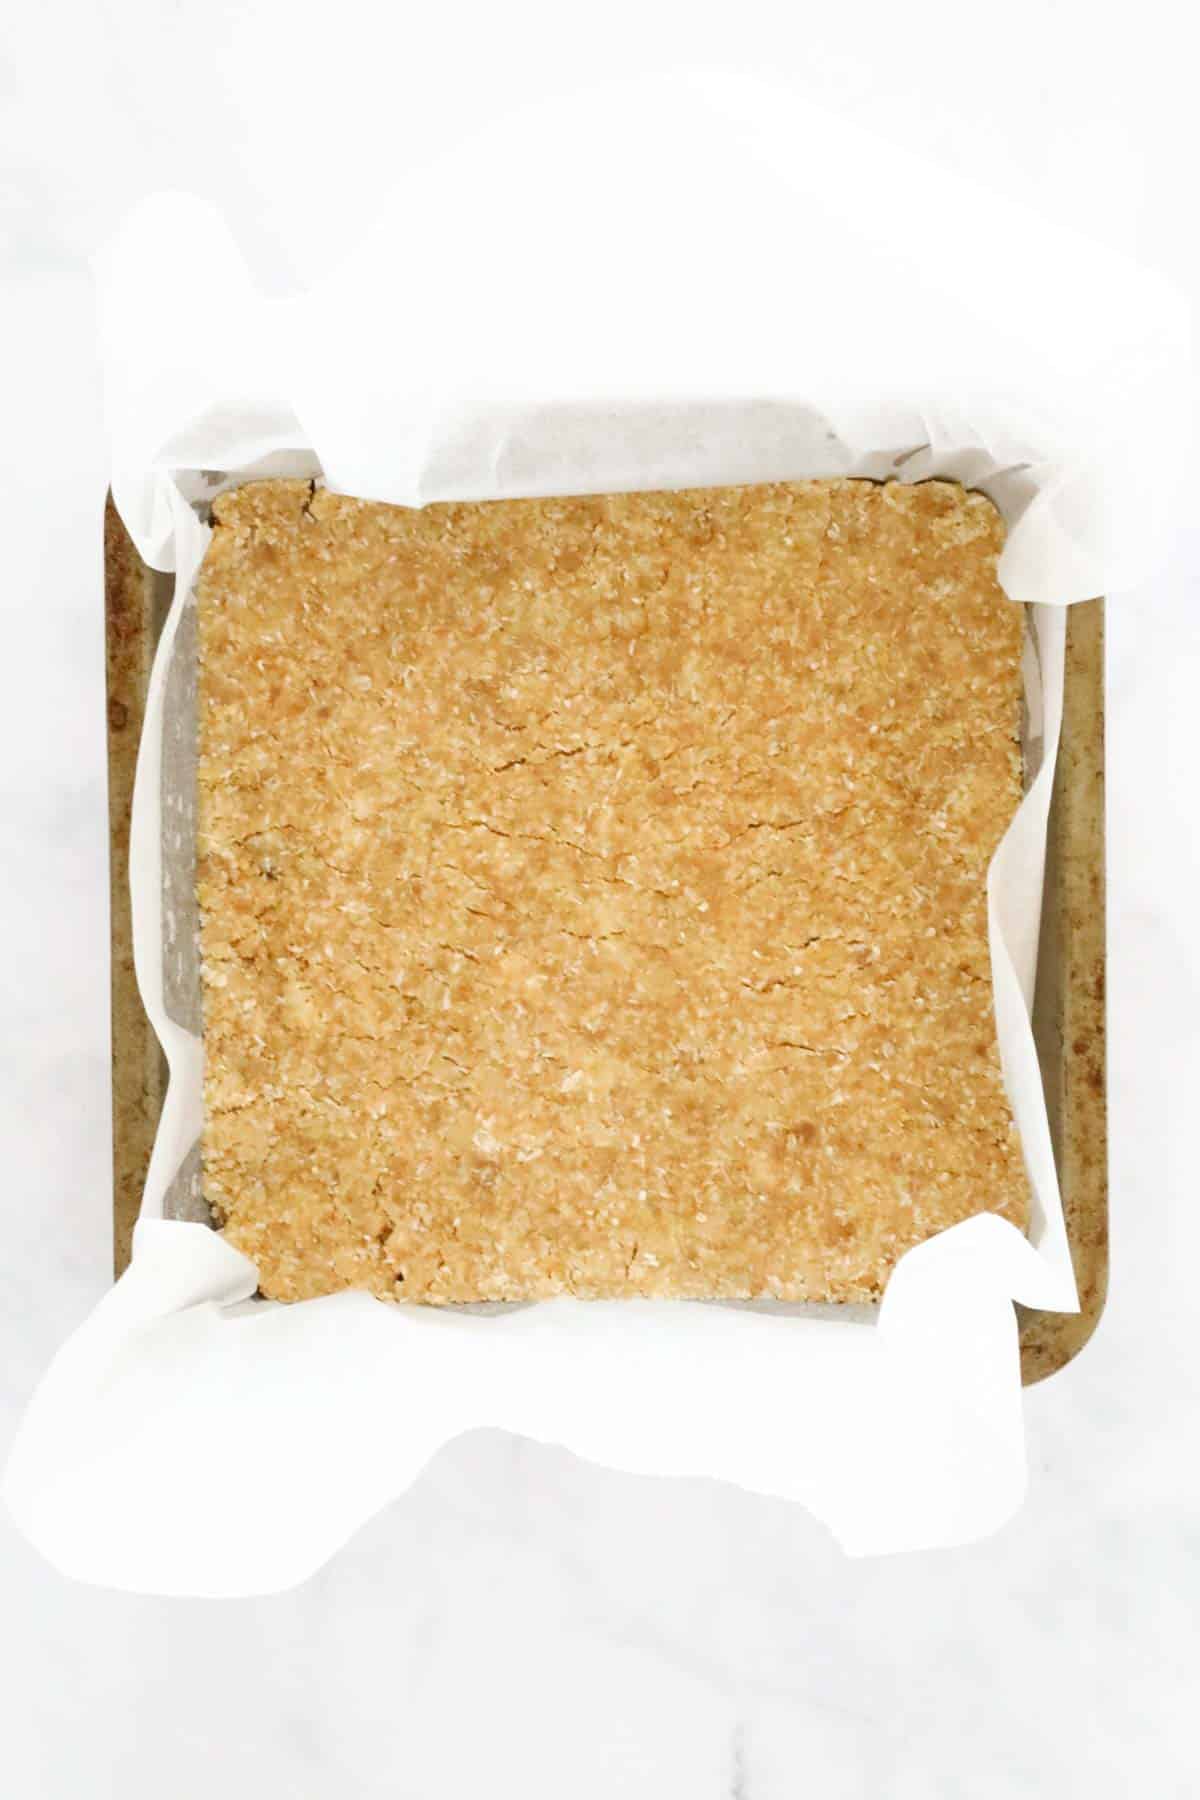 The Weet-Bix slice base pressed into a lined baking tin.